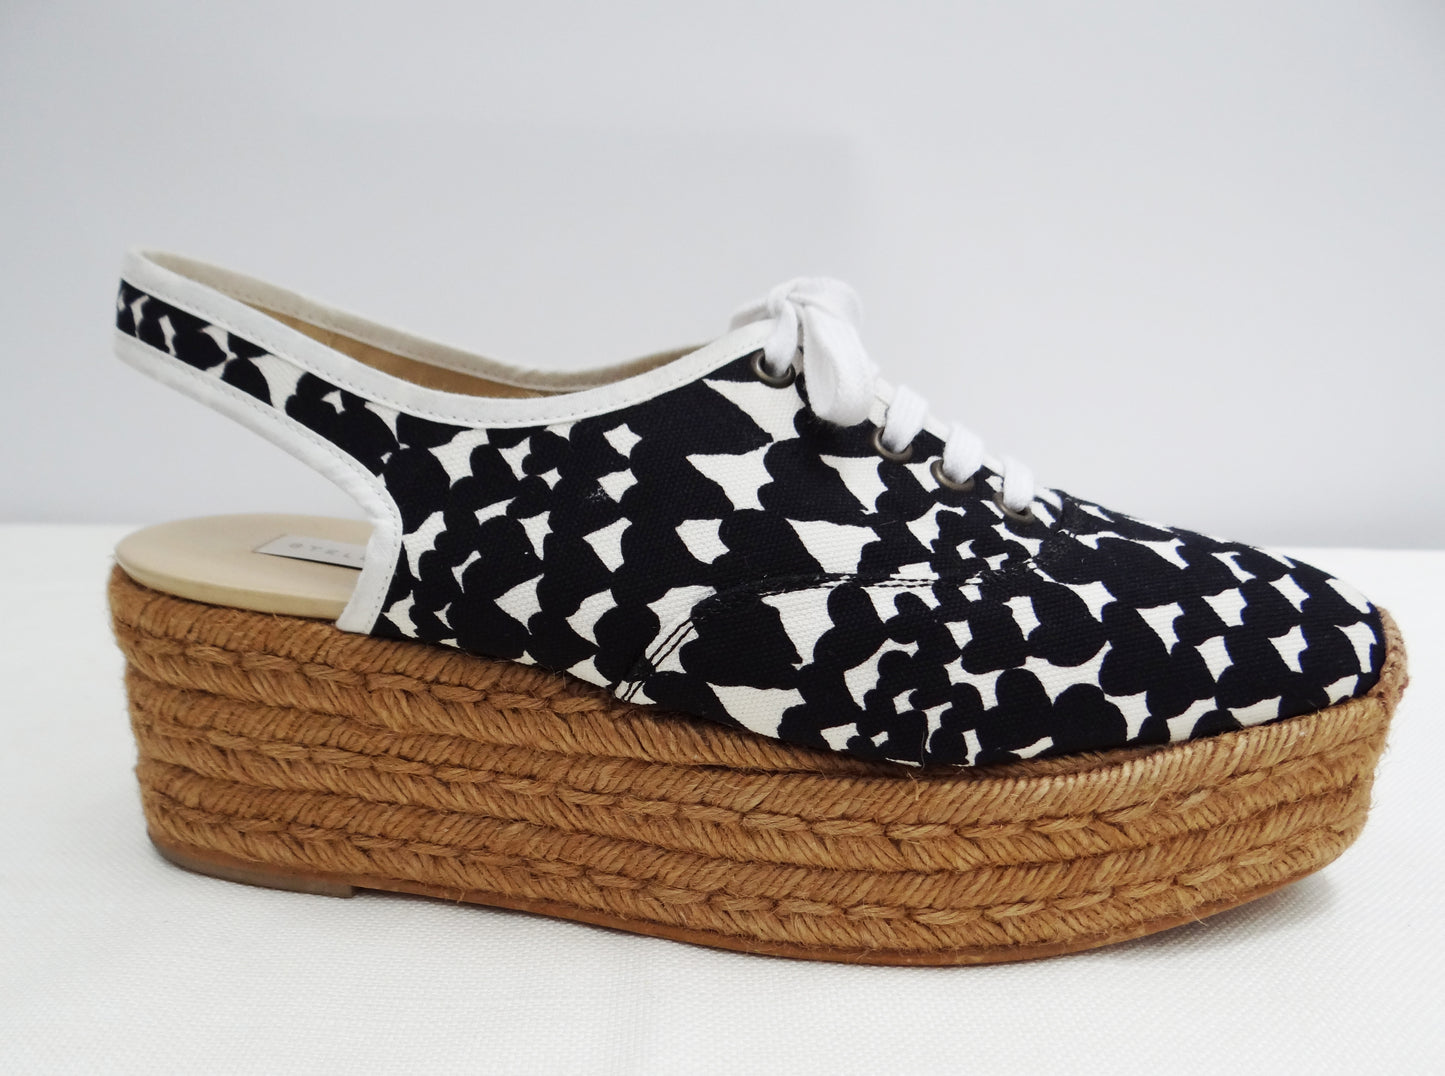 Stella McCartney Rope Soled Lace-up Summer Shoes with Heart Print, UK7